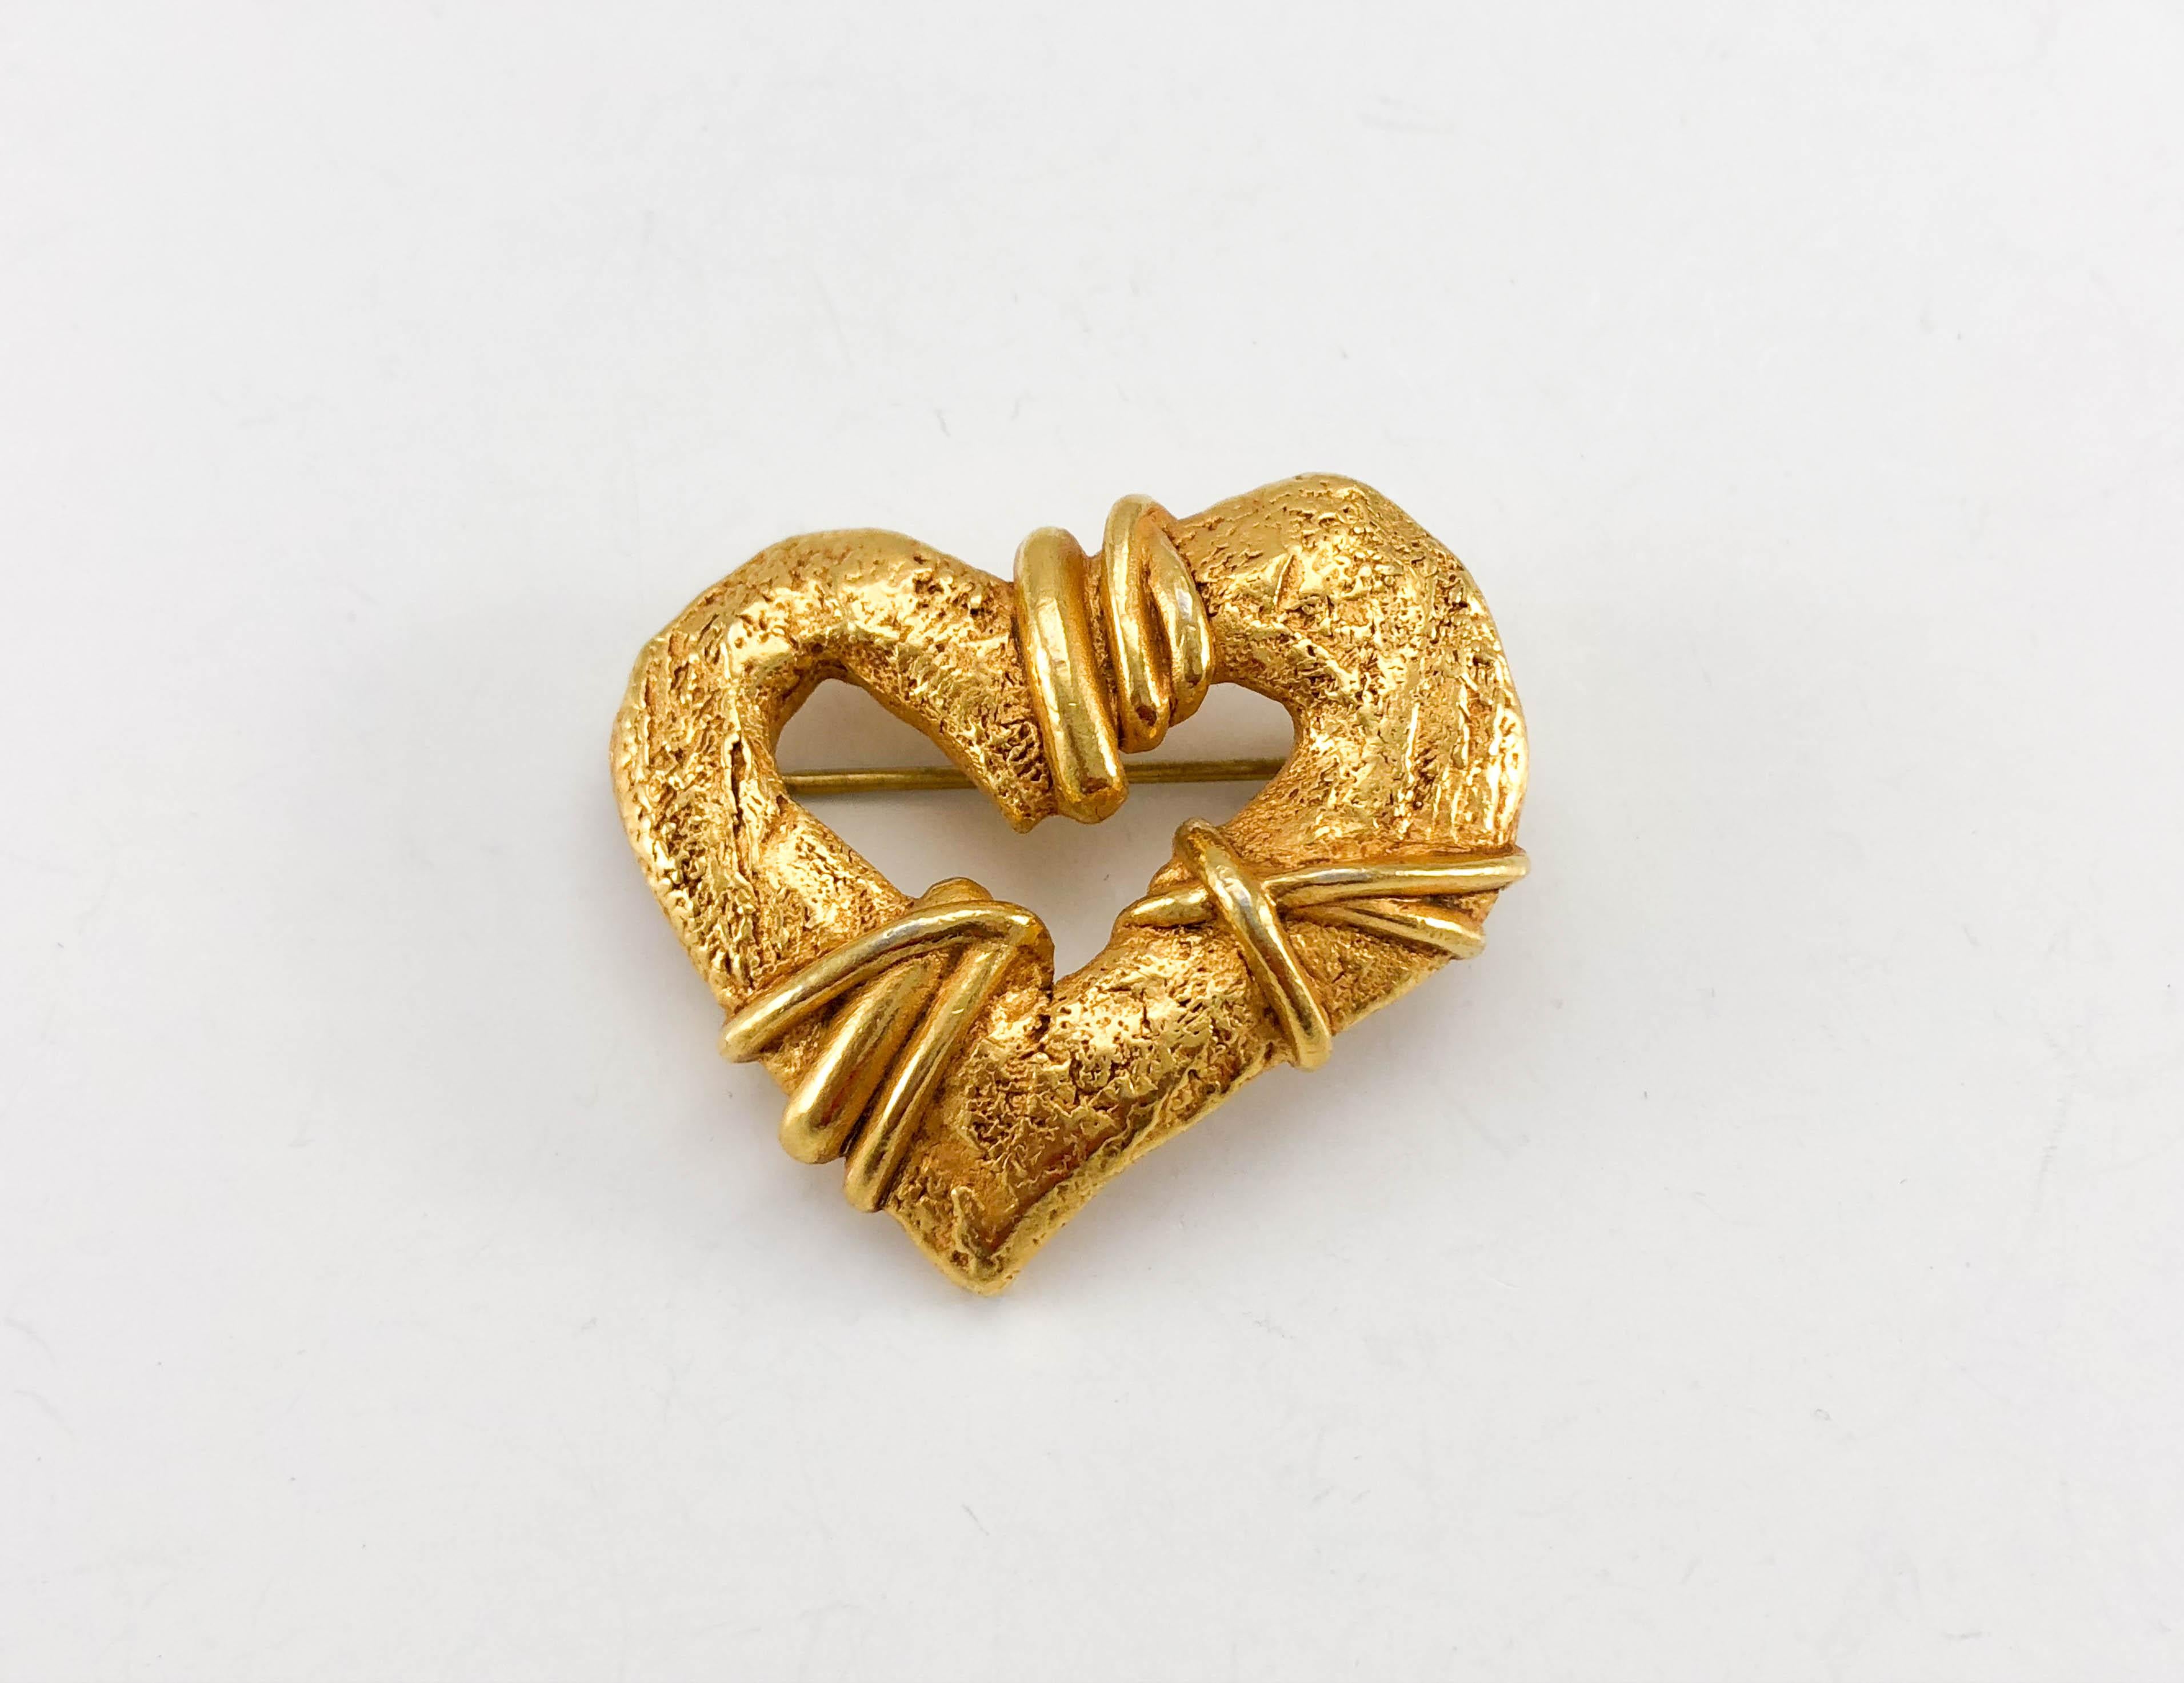 1994 Christian Lacroix Gold-Plated Heart Brooch, by Robert Goossens For Sale 1